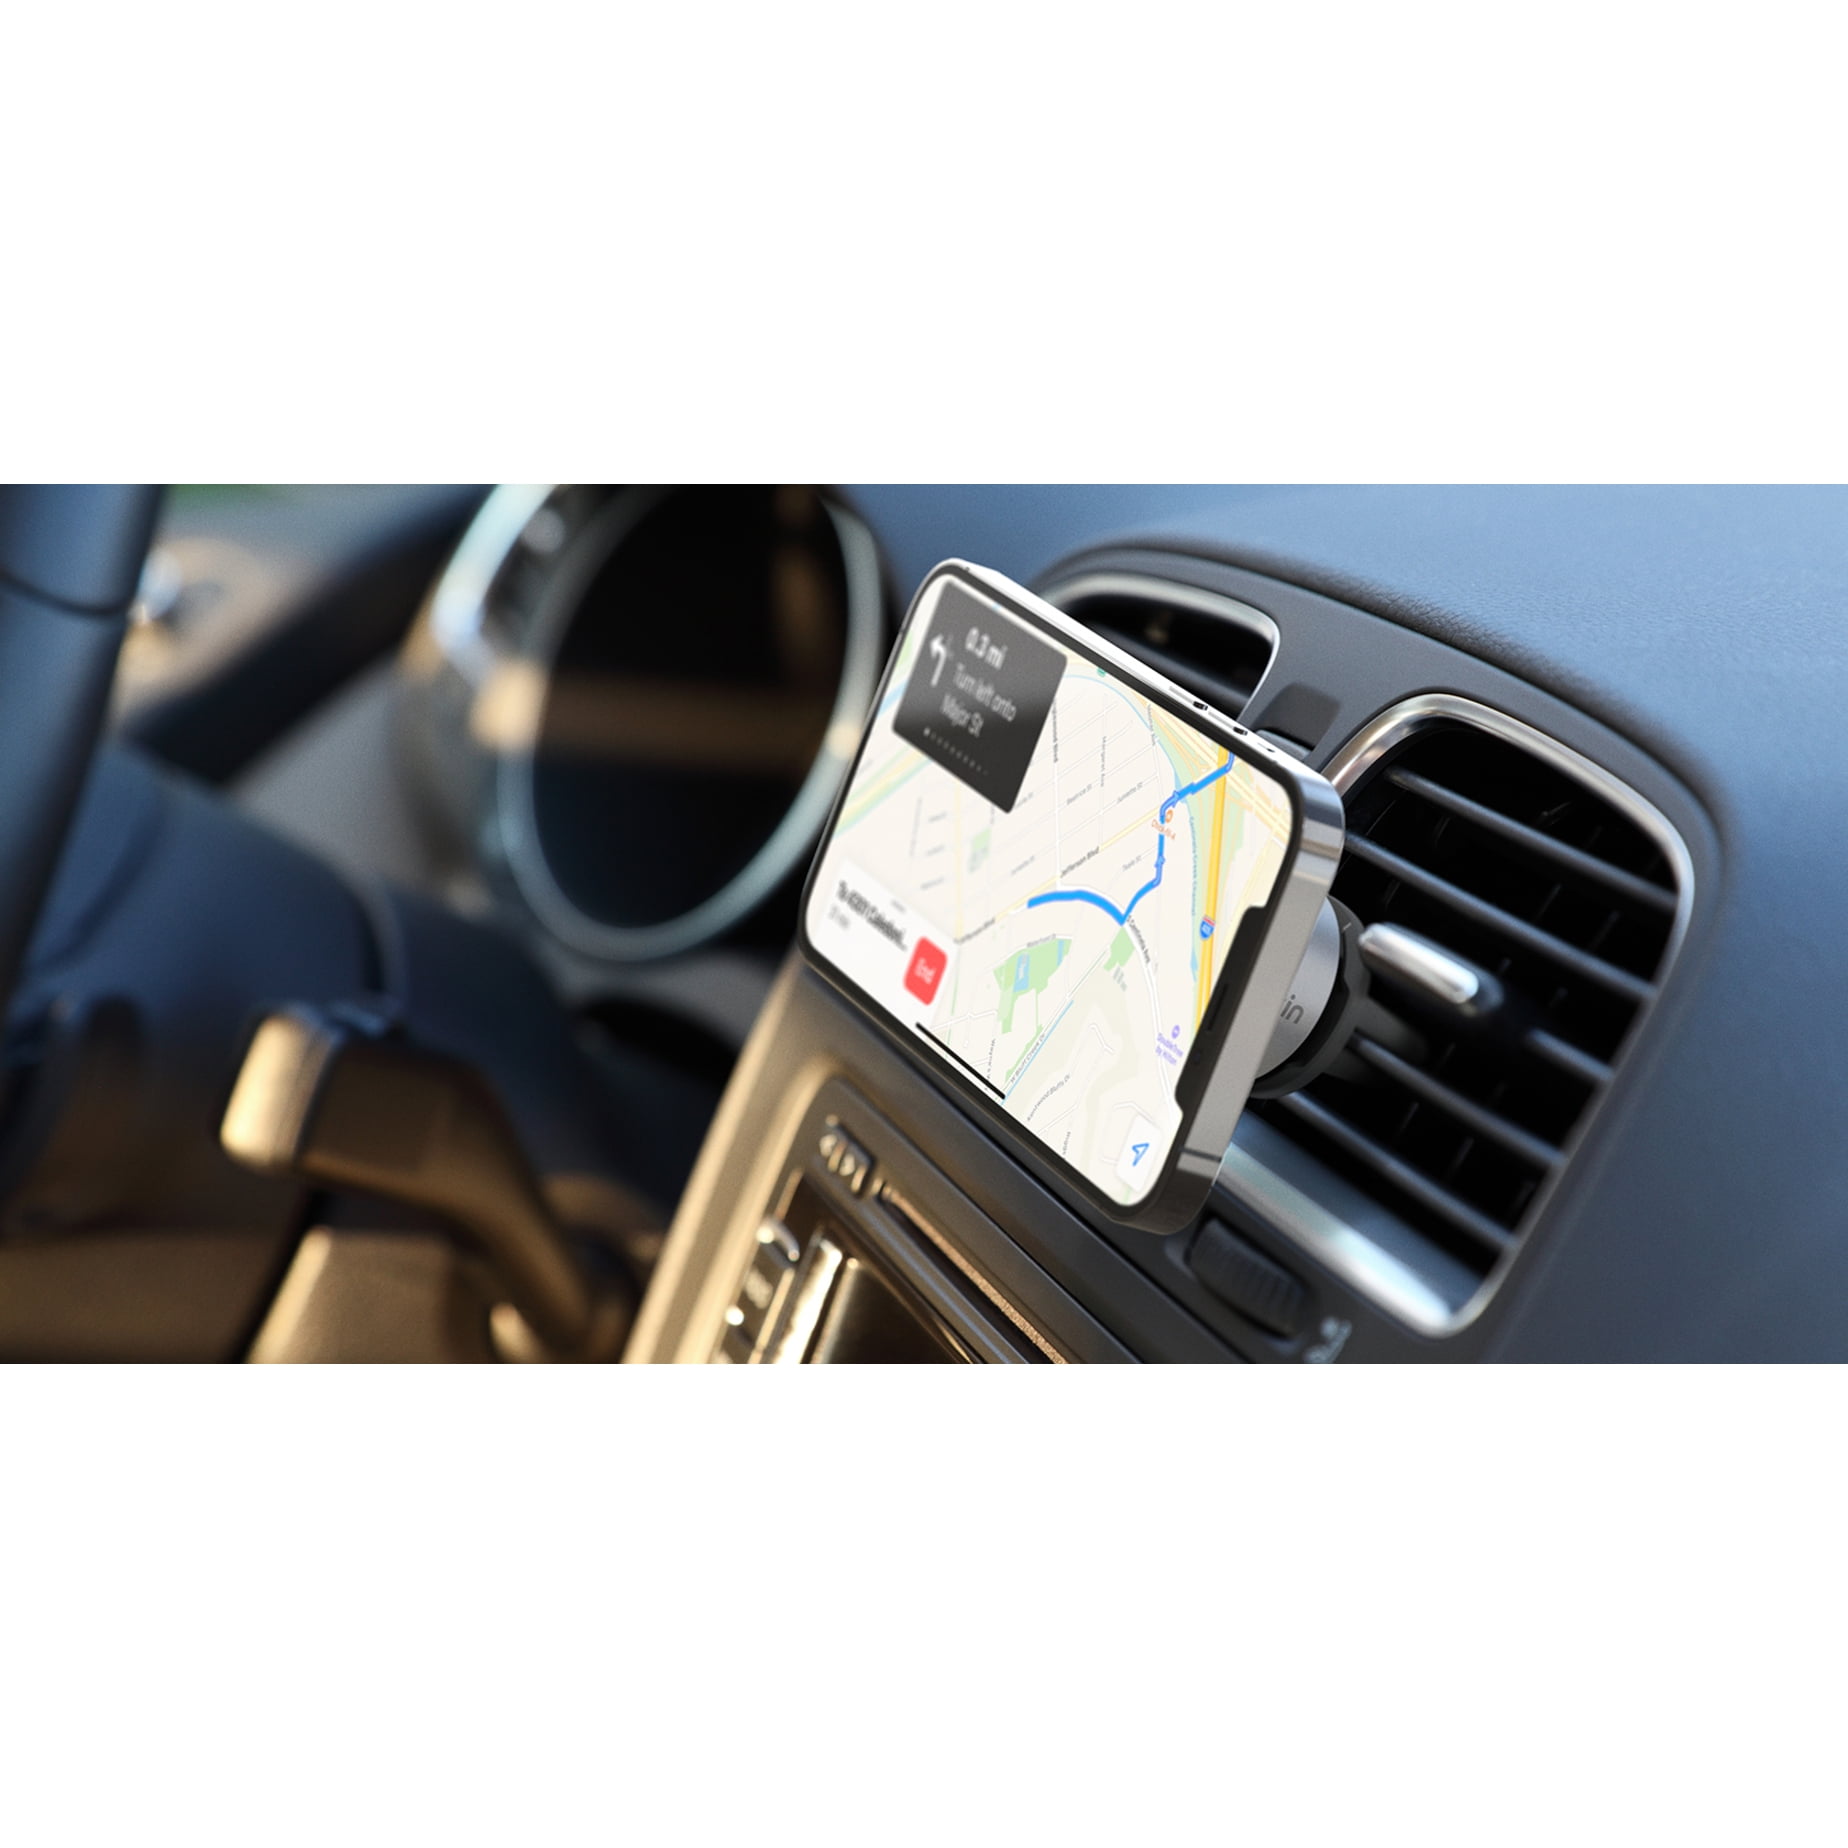 Belkin MagSafe Vent Mount Pro - MagSafe Phone Mount For Car - Car  Accessories - Car Phone Holder Mount - Magnetic Phone Holder for iPhone 15,  iPhone 14, iPhone 13 Pro Max, Pro, and Mini Models 